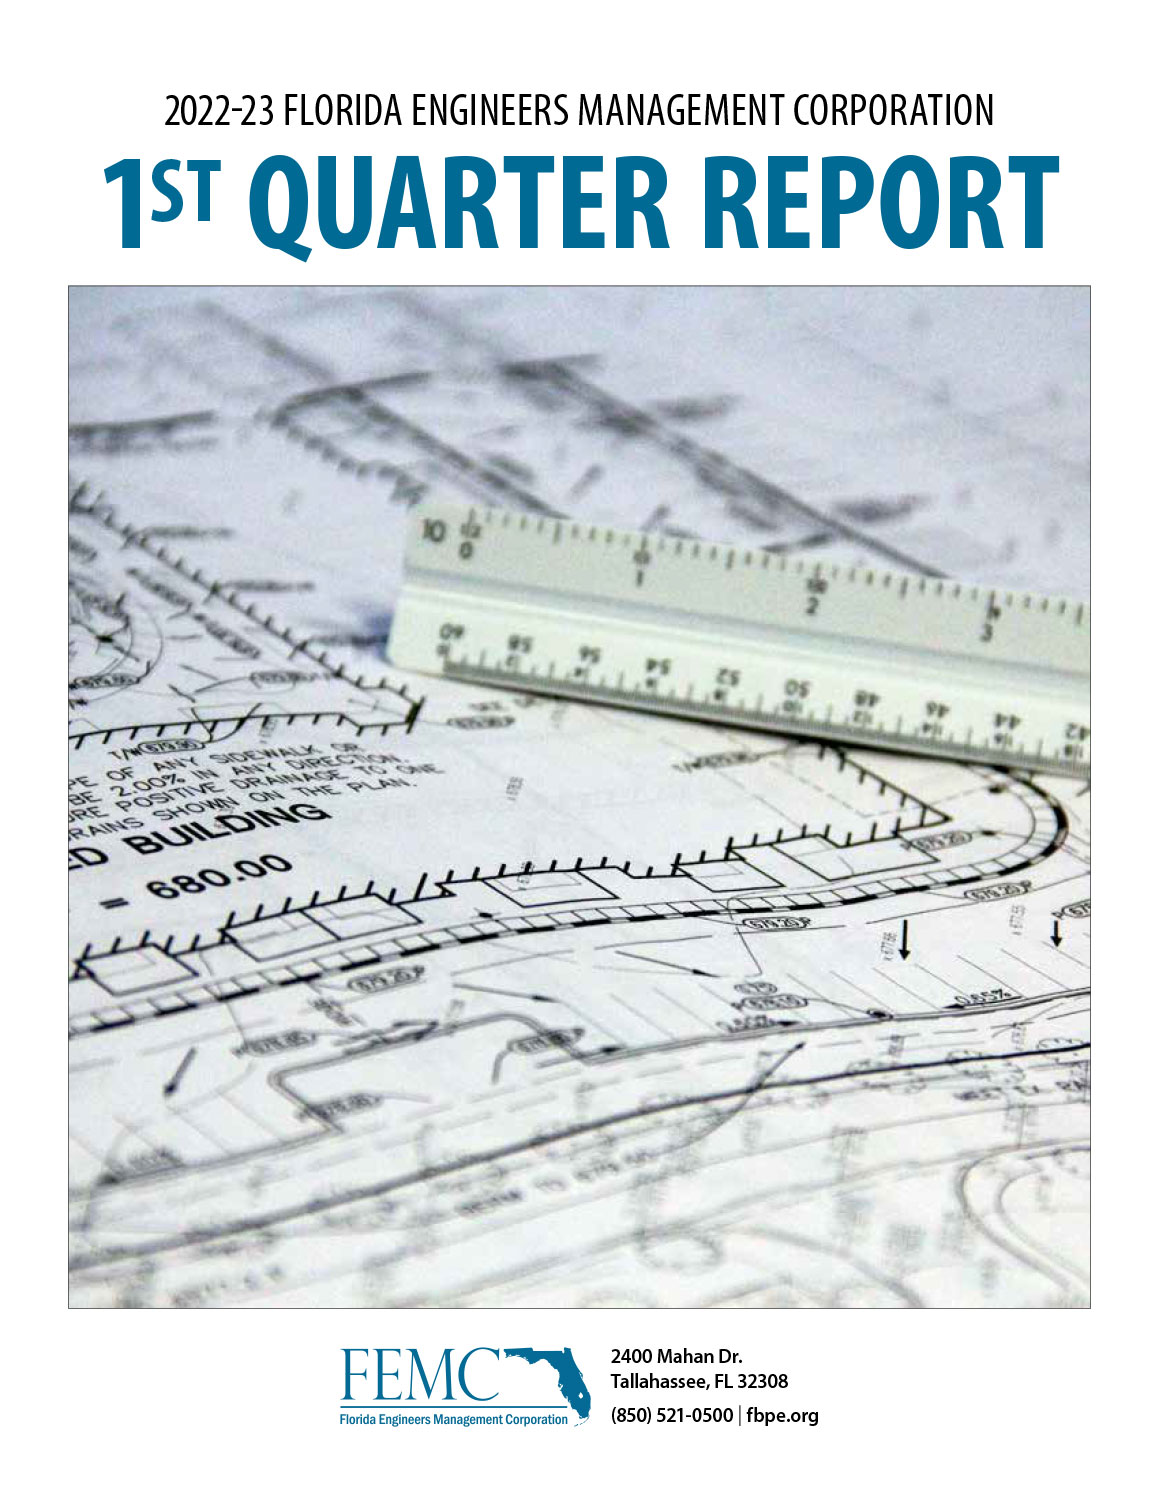 The cover of the 2022-23 Florida Engineers Management Corporation 1st Quarter Report